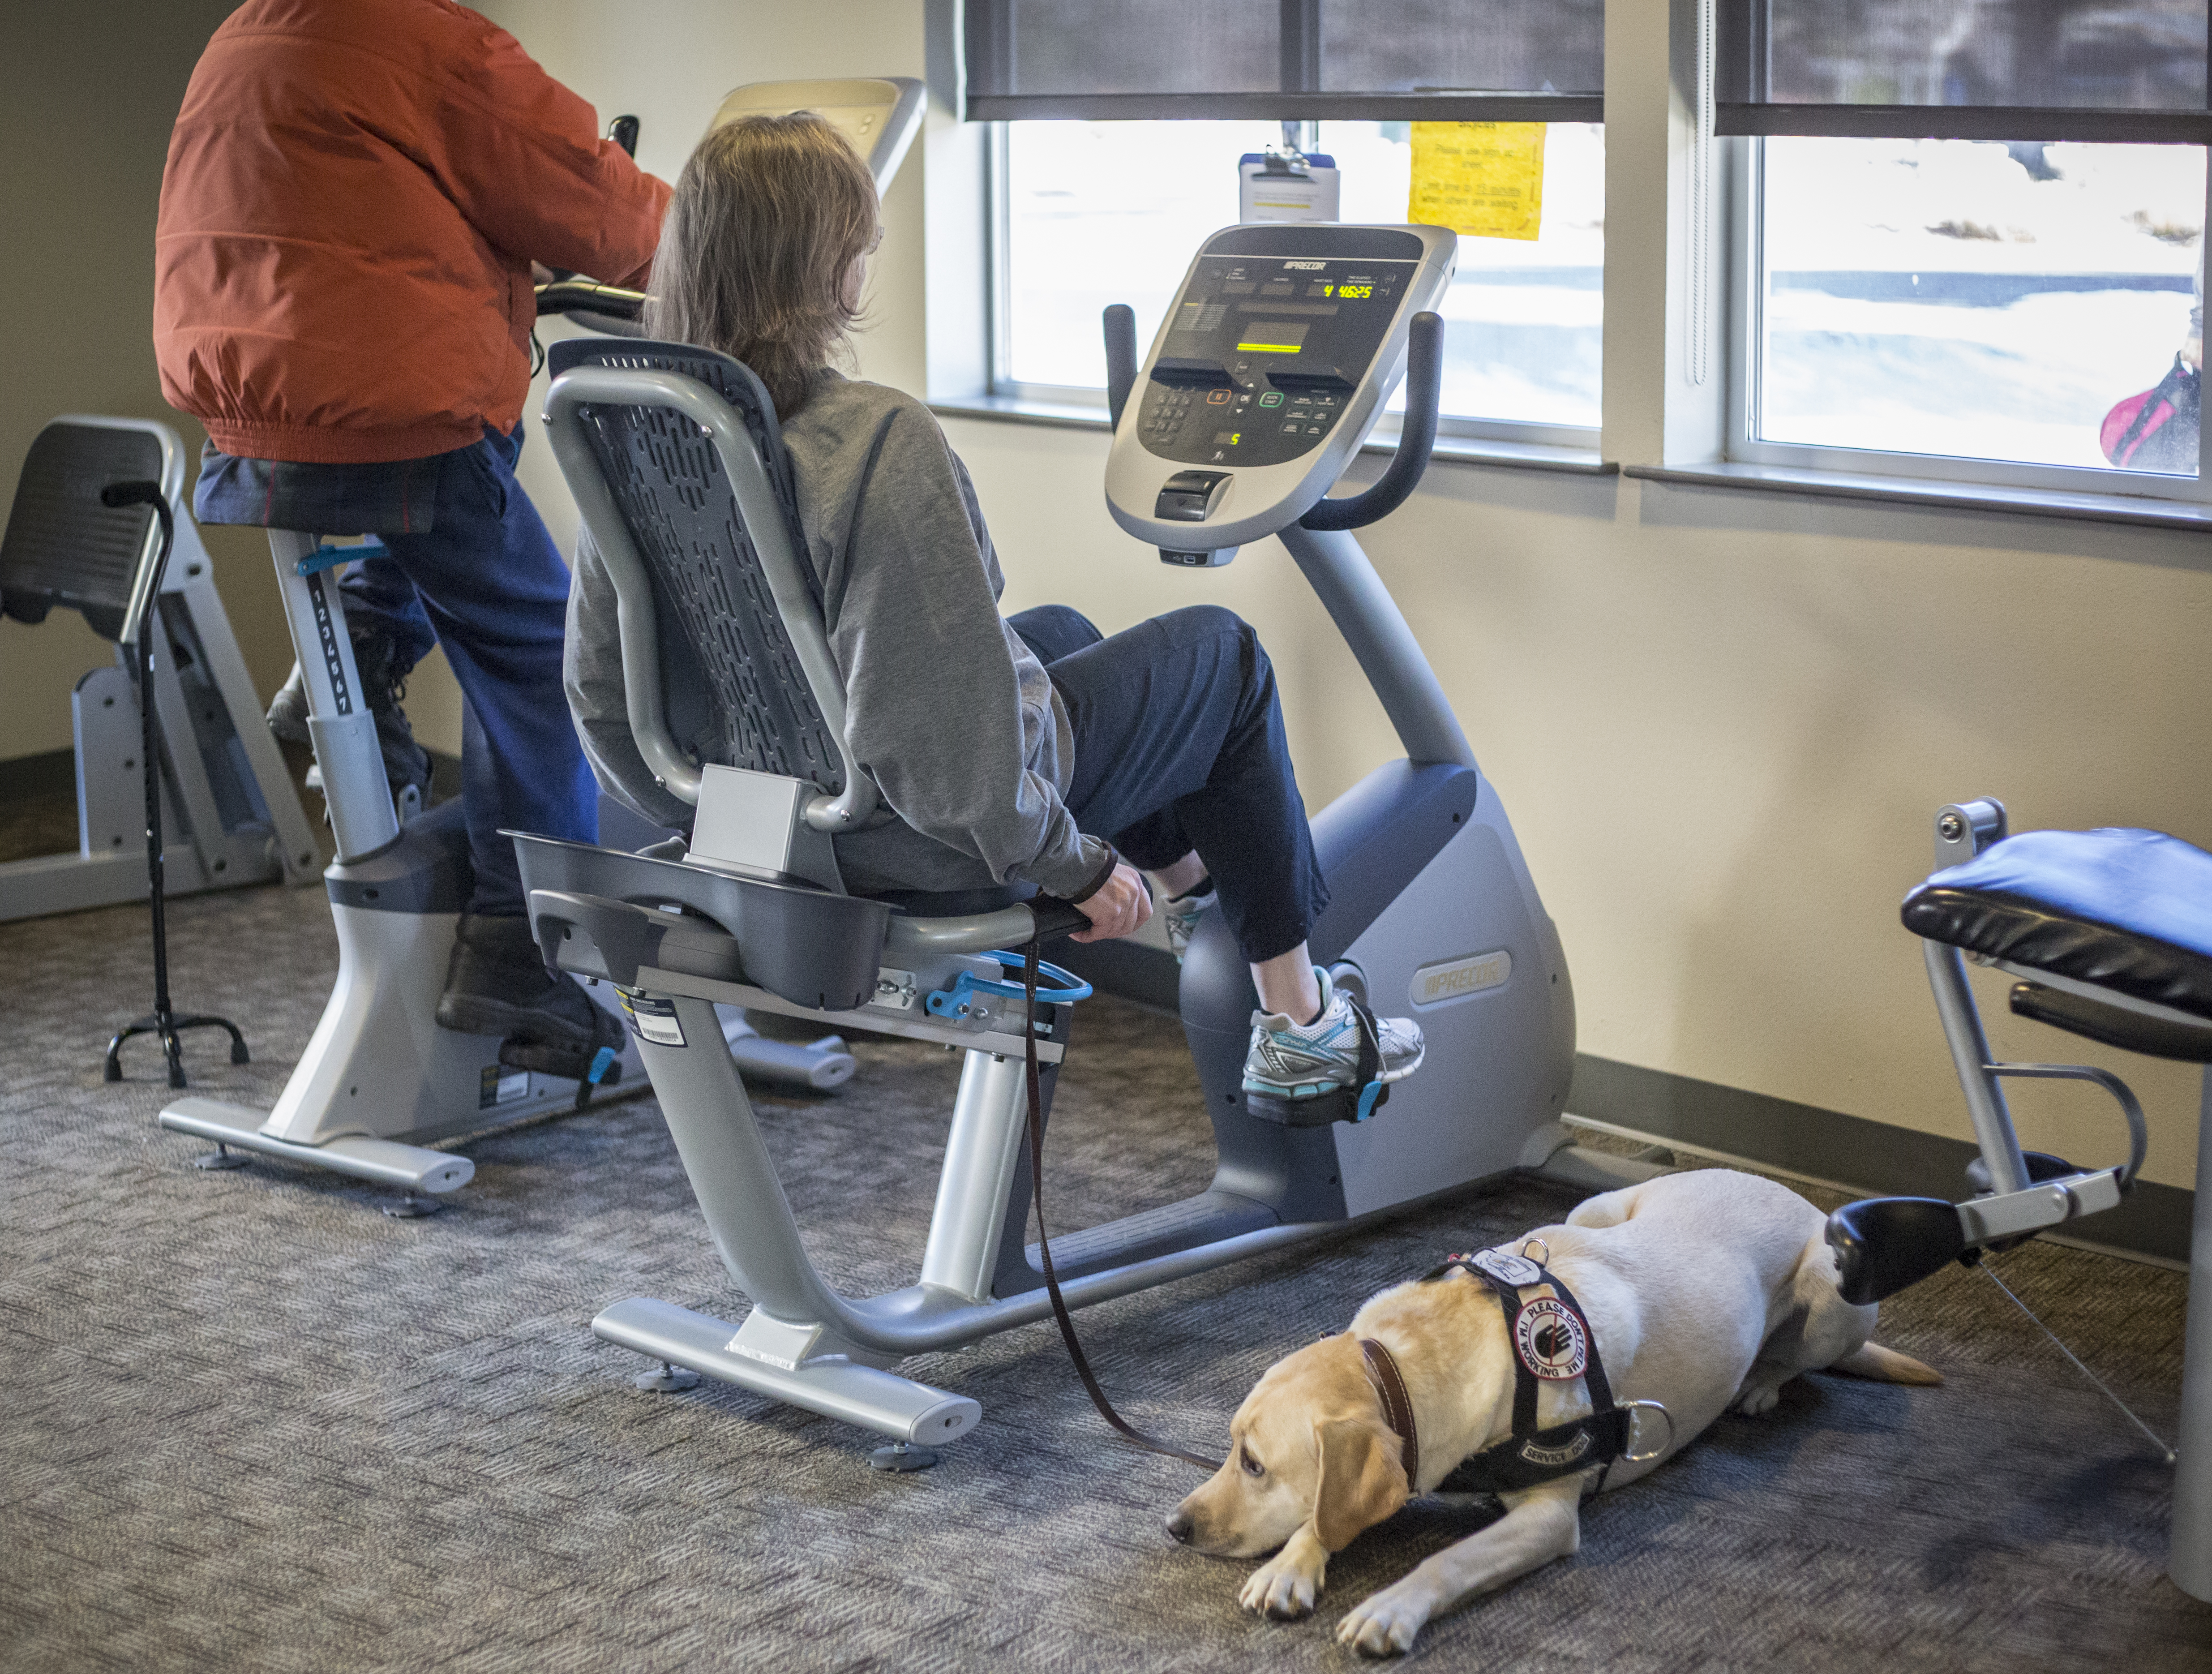 A dog rests while a woman operates a cycling machine at the Social activity at Bend Senior Center.